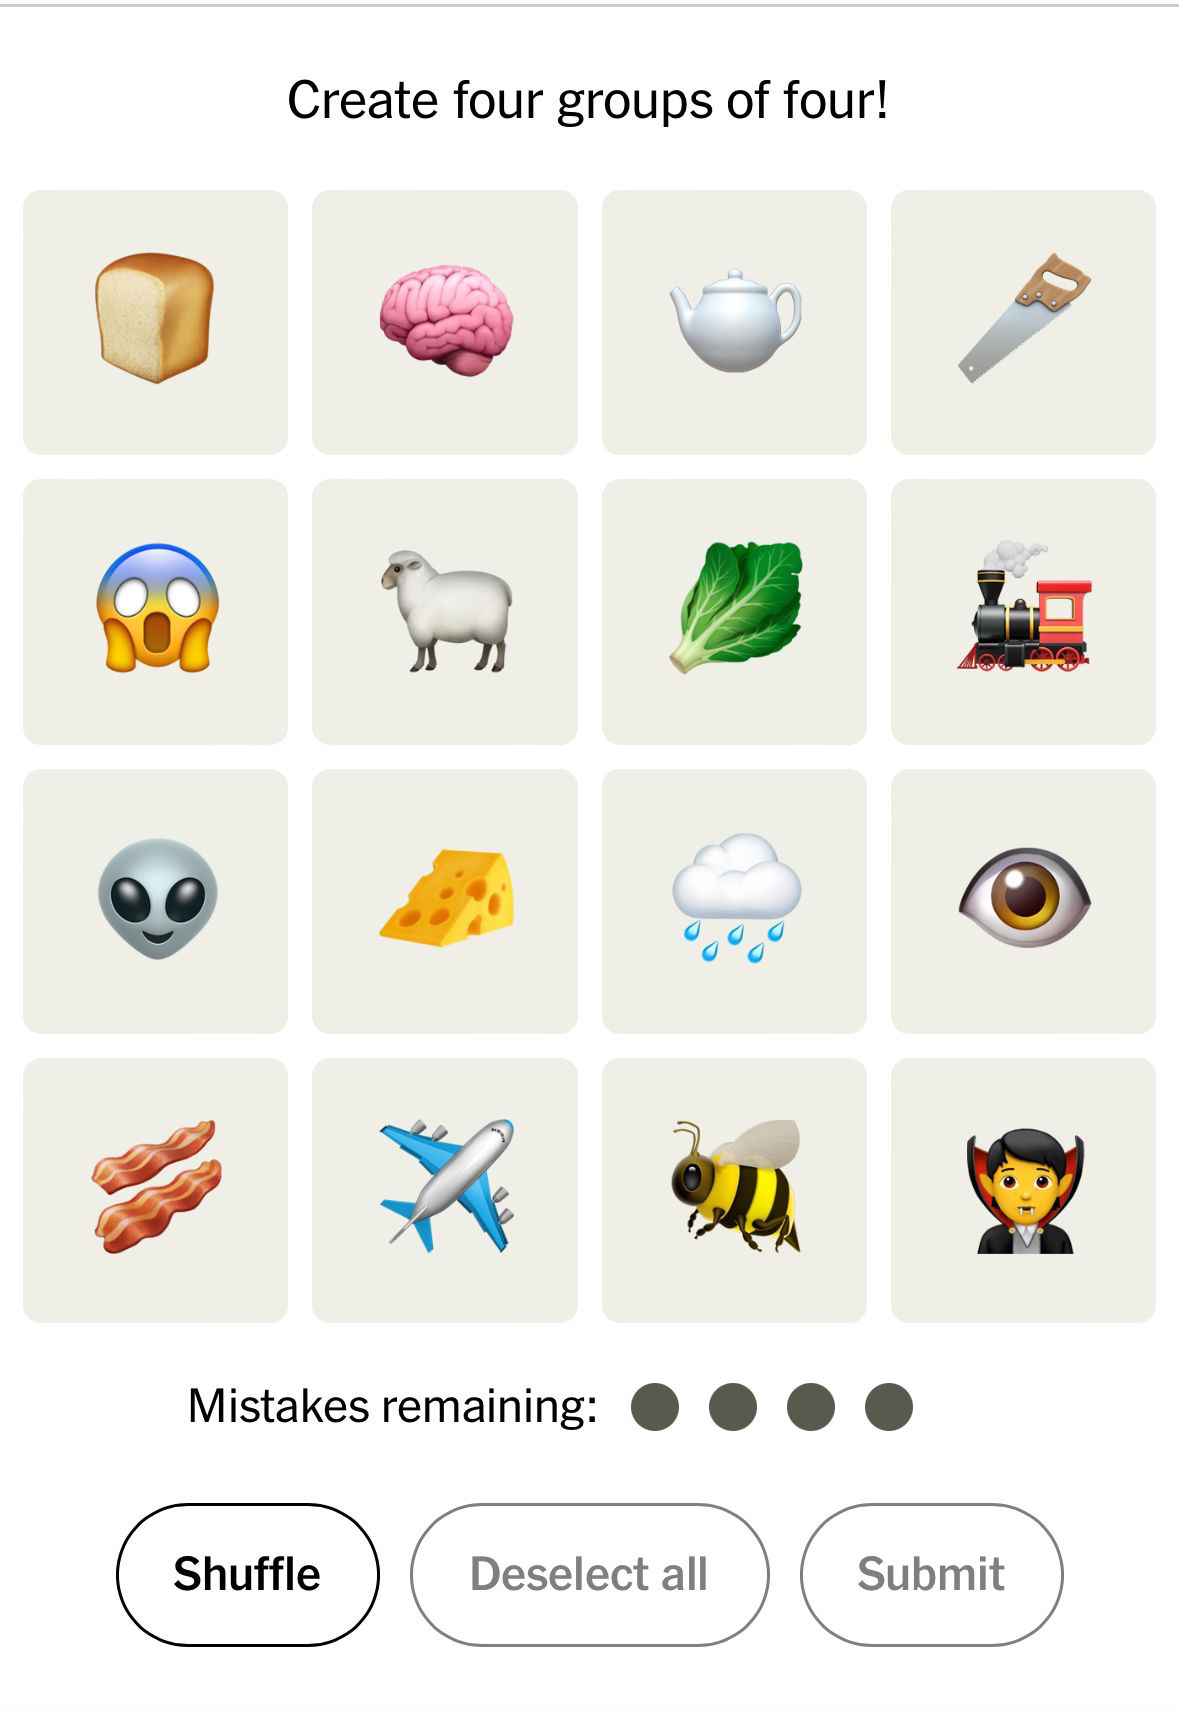 A grid of sixteen emojis with the task of creating groups of four: bread, brain, teapot, saw, scream face, sheep, lettuce, train, alien, cheese, raincloud, eye, bacon, airplane, bee, and vampire.